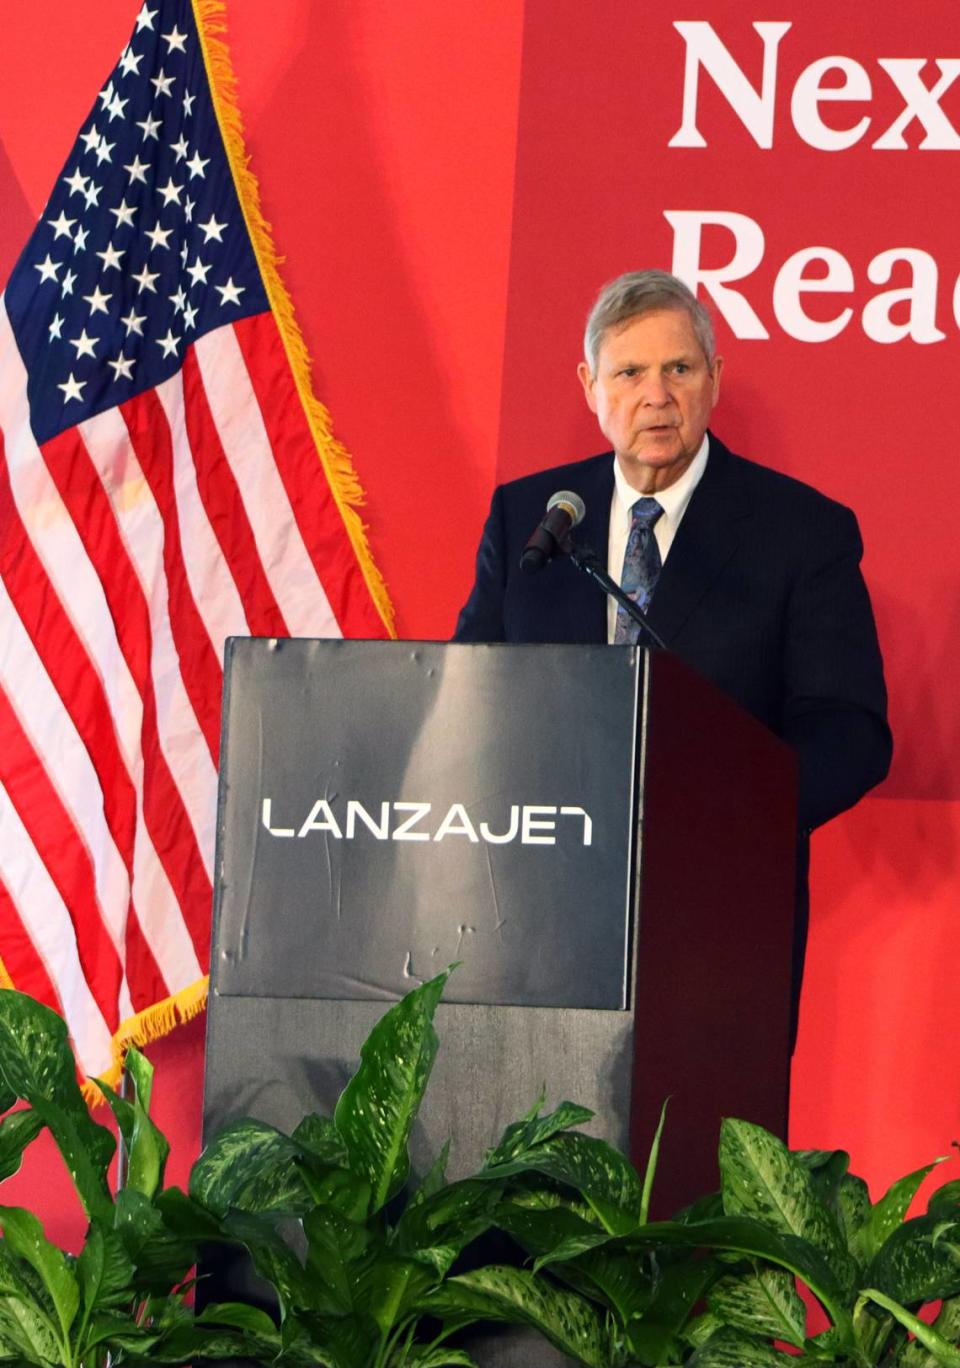 U.S. Secretary of Agriculture, Tom Vilsack speaks to the crowd of 300 people at the opening day ceremony at LanzaJet Freedom Pines facility about the importance of local economy, farmers understanding climate smart practices, and the excitement to reach net-zero in SAF by 2050 thanks to LanzaTech and LanzaJet.